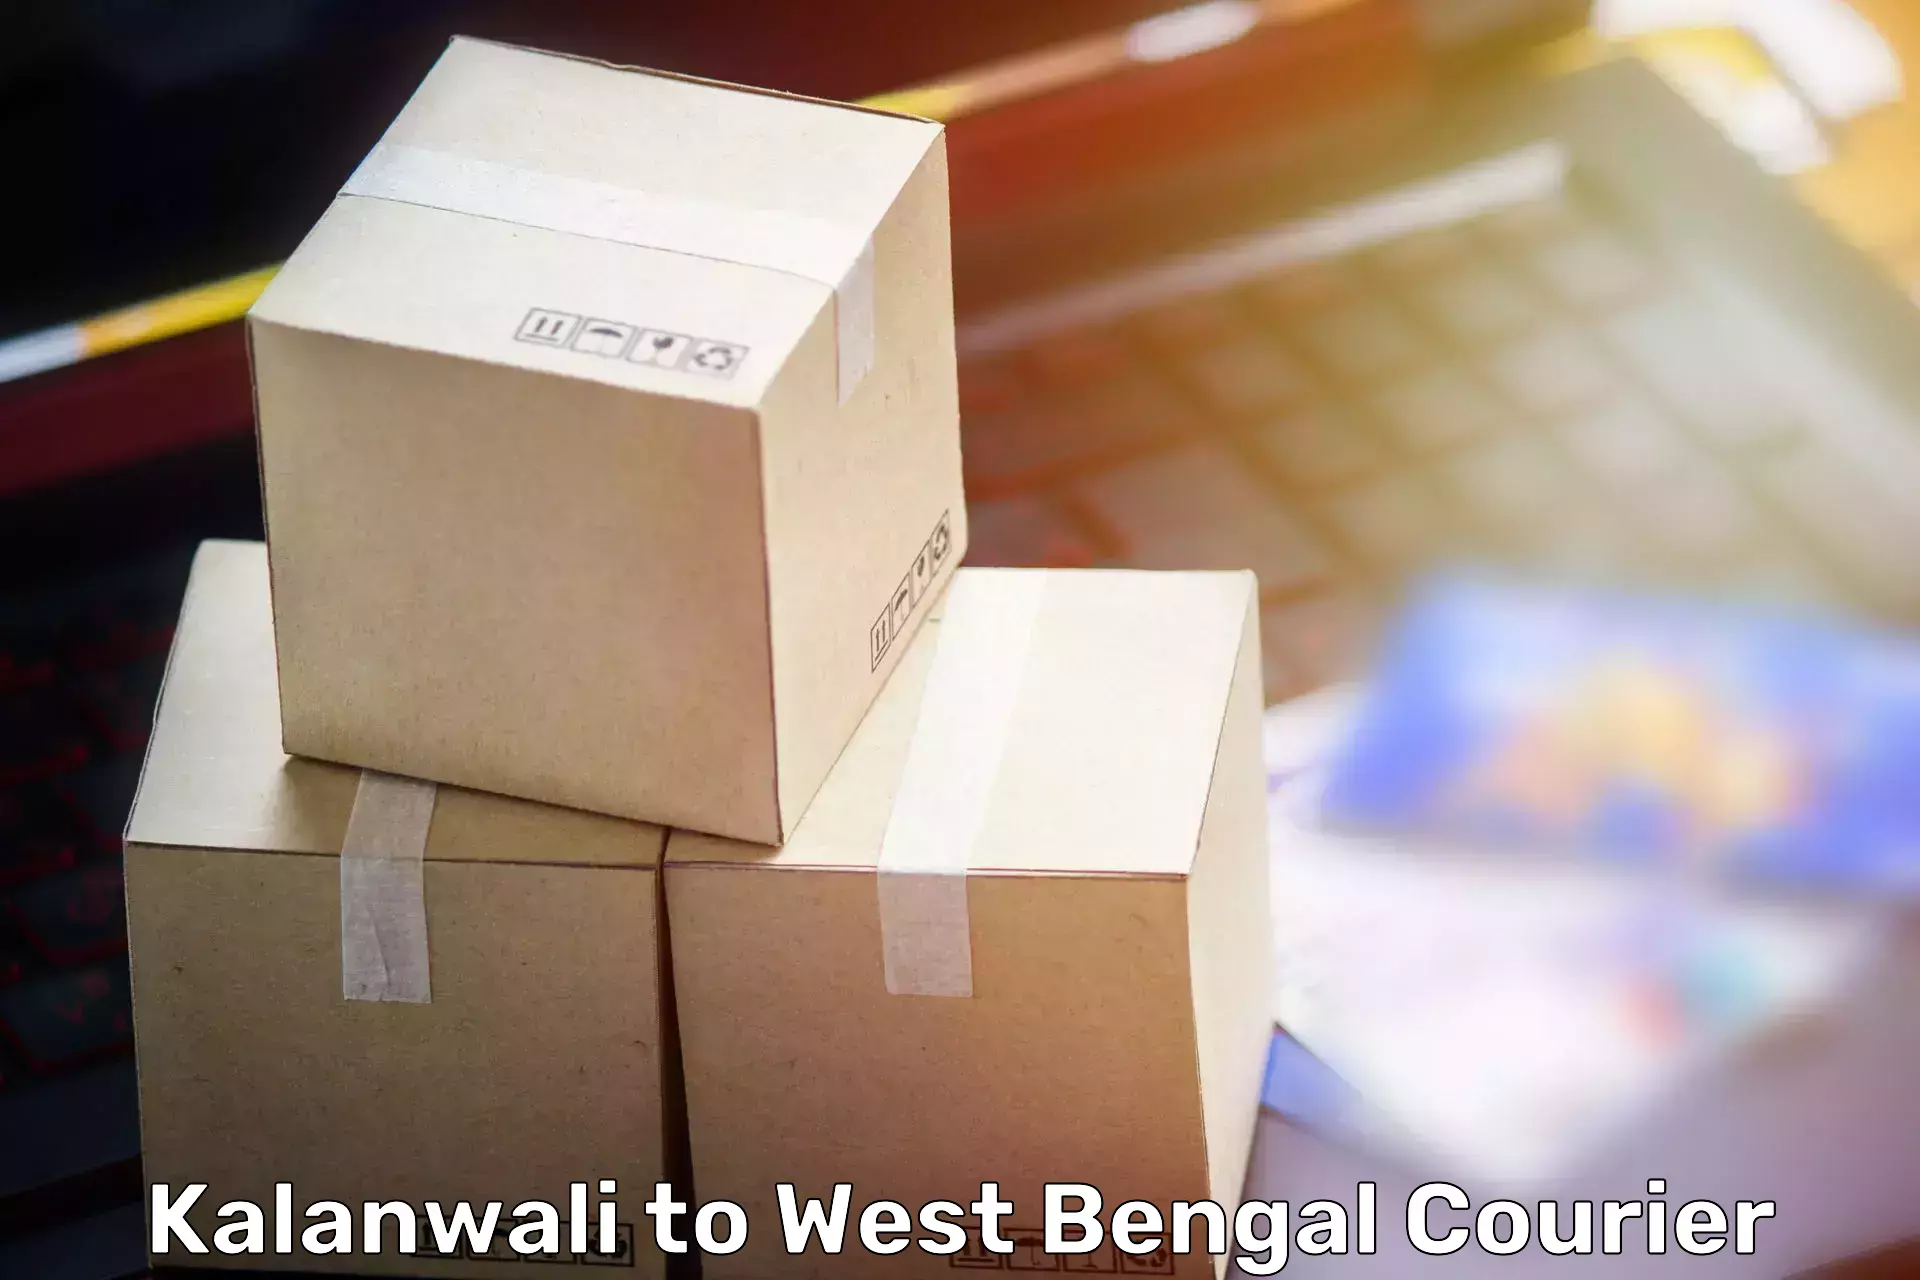 Furniture delivery service Kalanwali to Chalsa